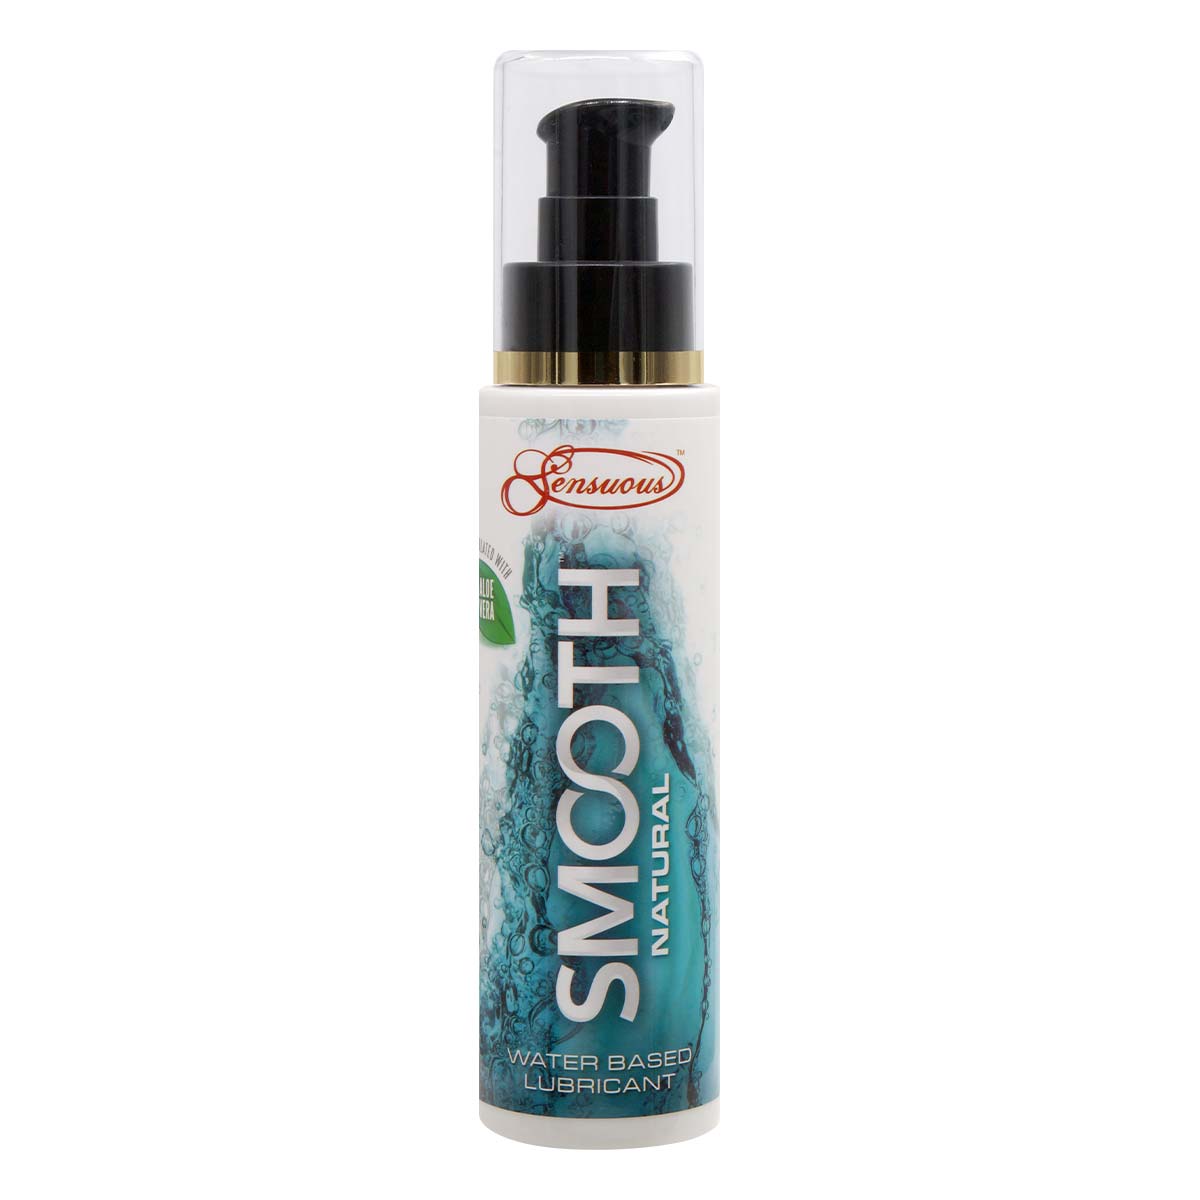 Sensuous Smooth Natural 100ml 水性润滑液-p_2